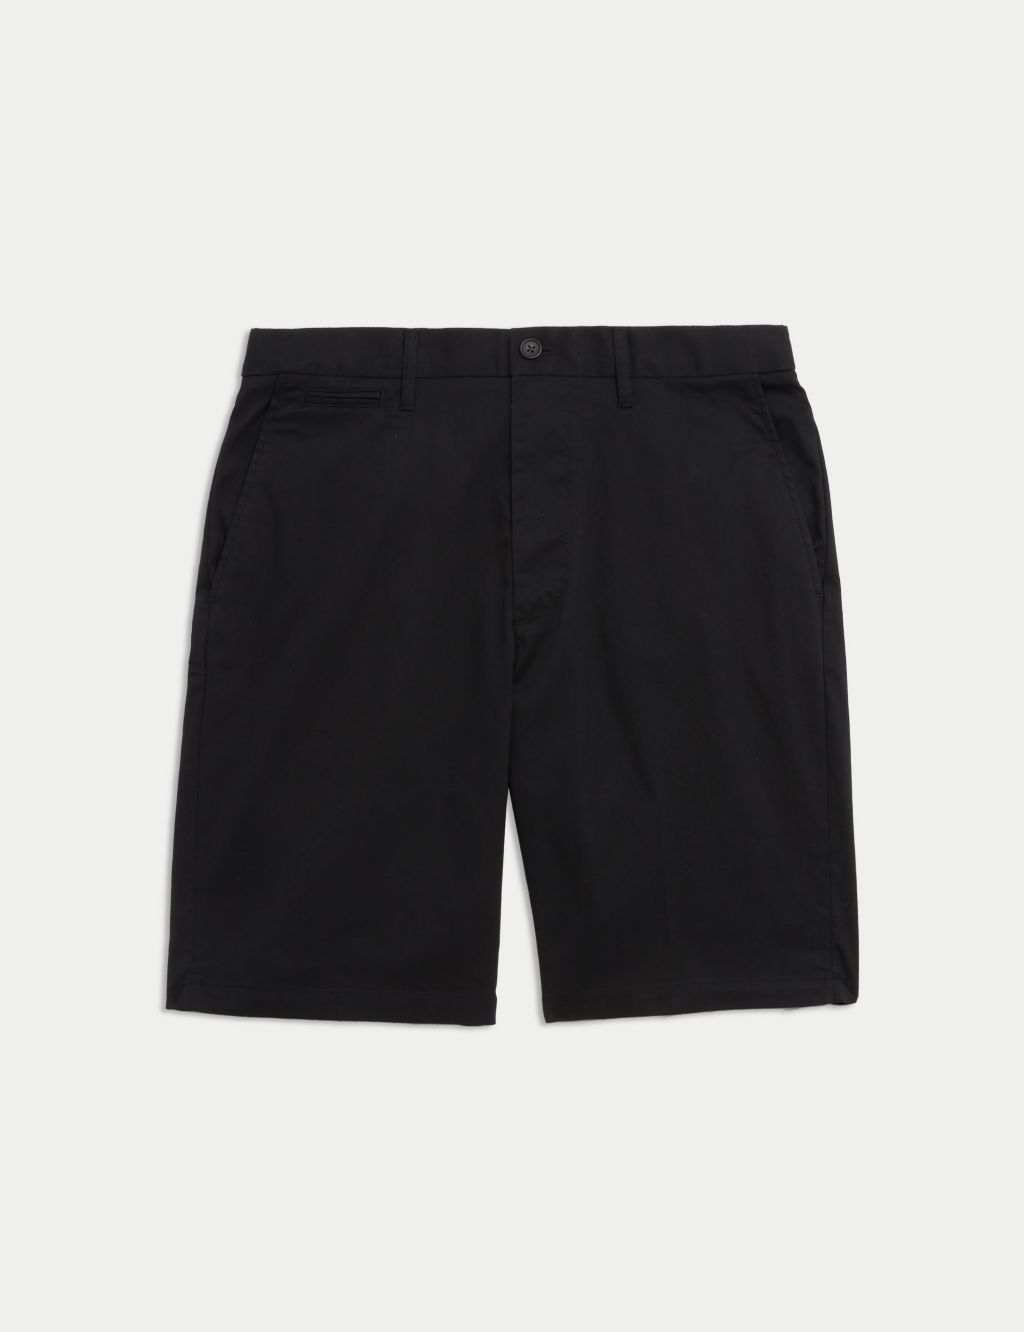 Buy Super Lightweight Stretch Chino Shorts | M&S Collection | M&S